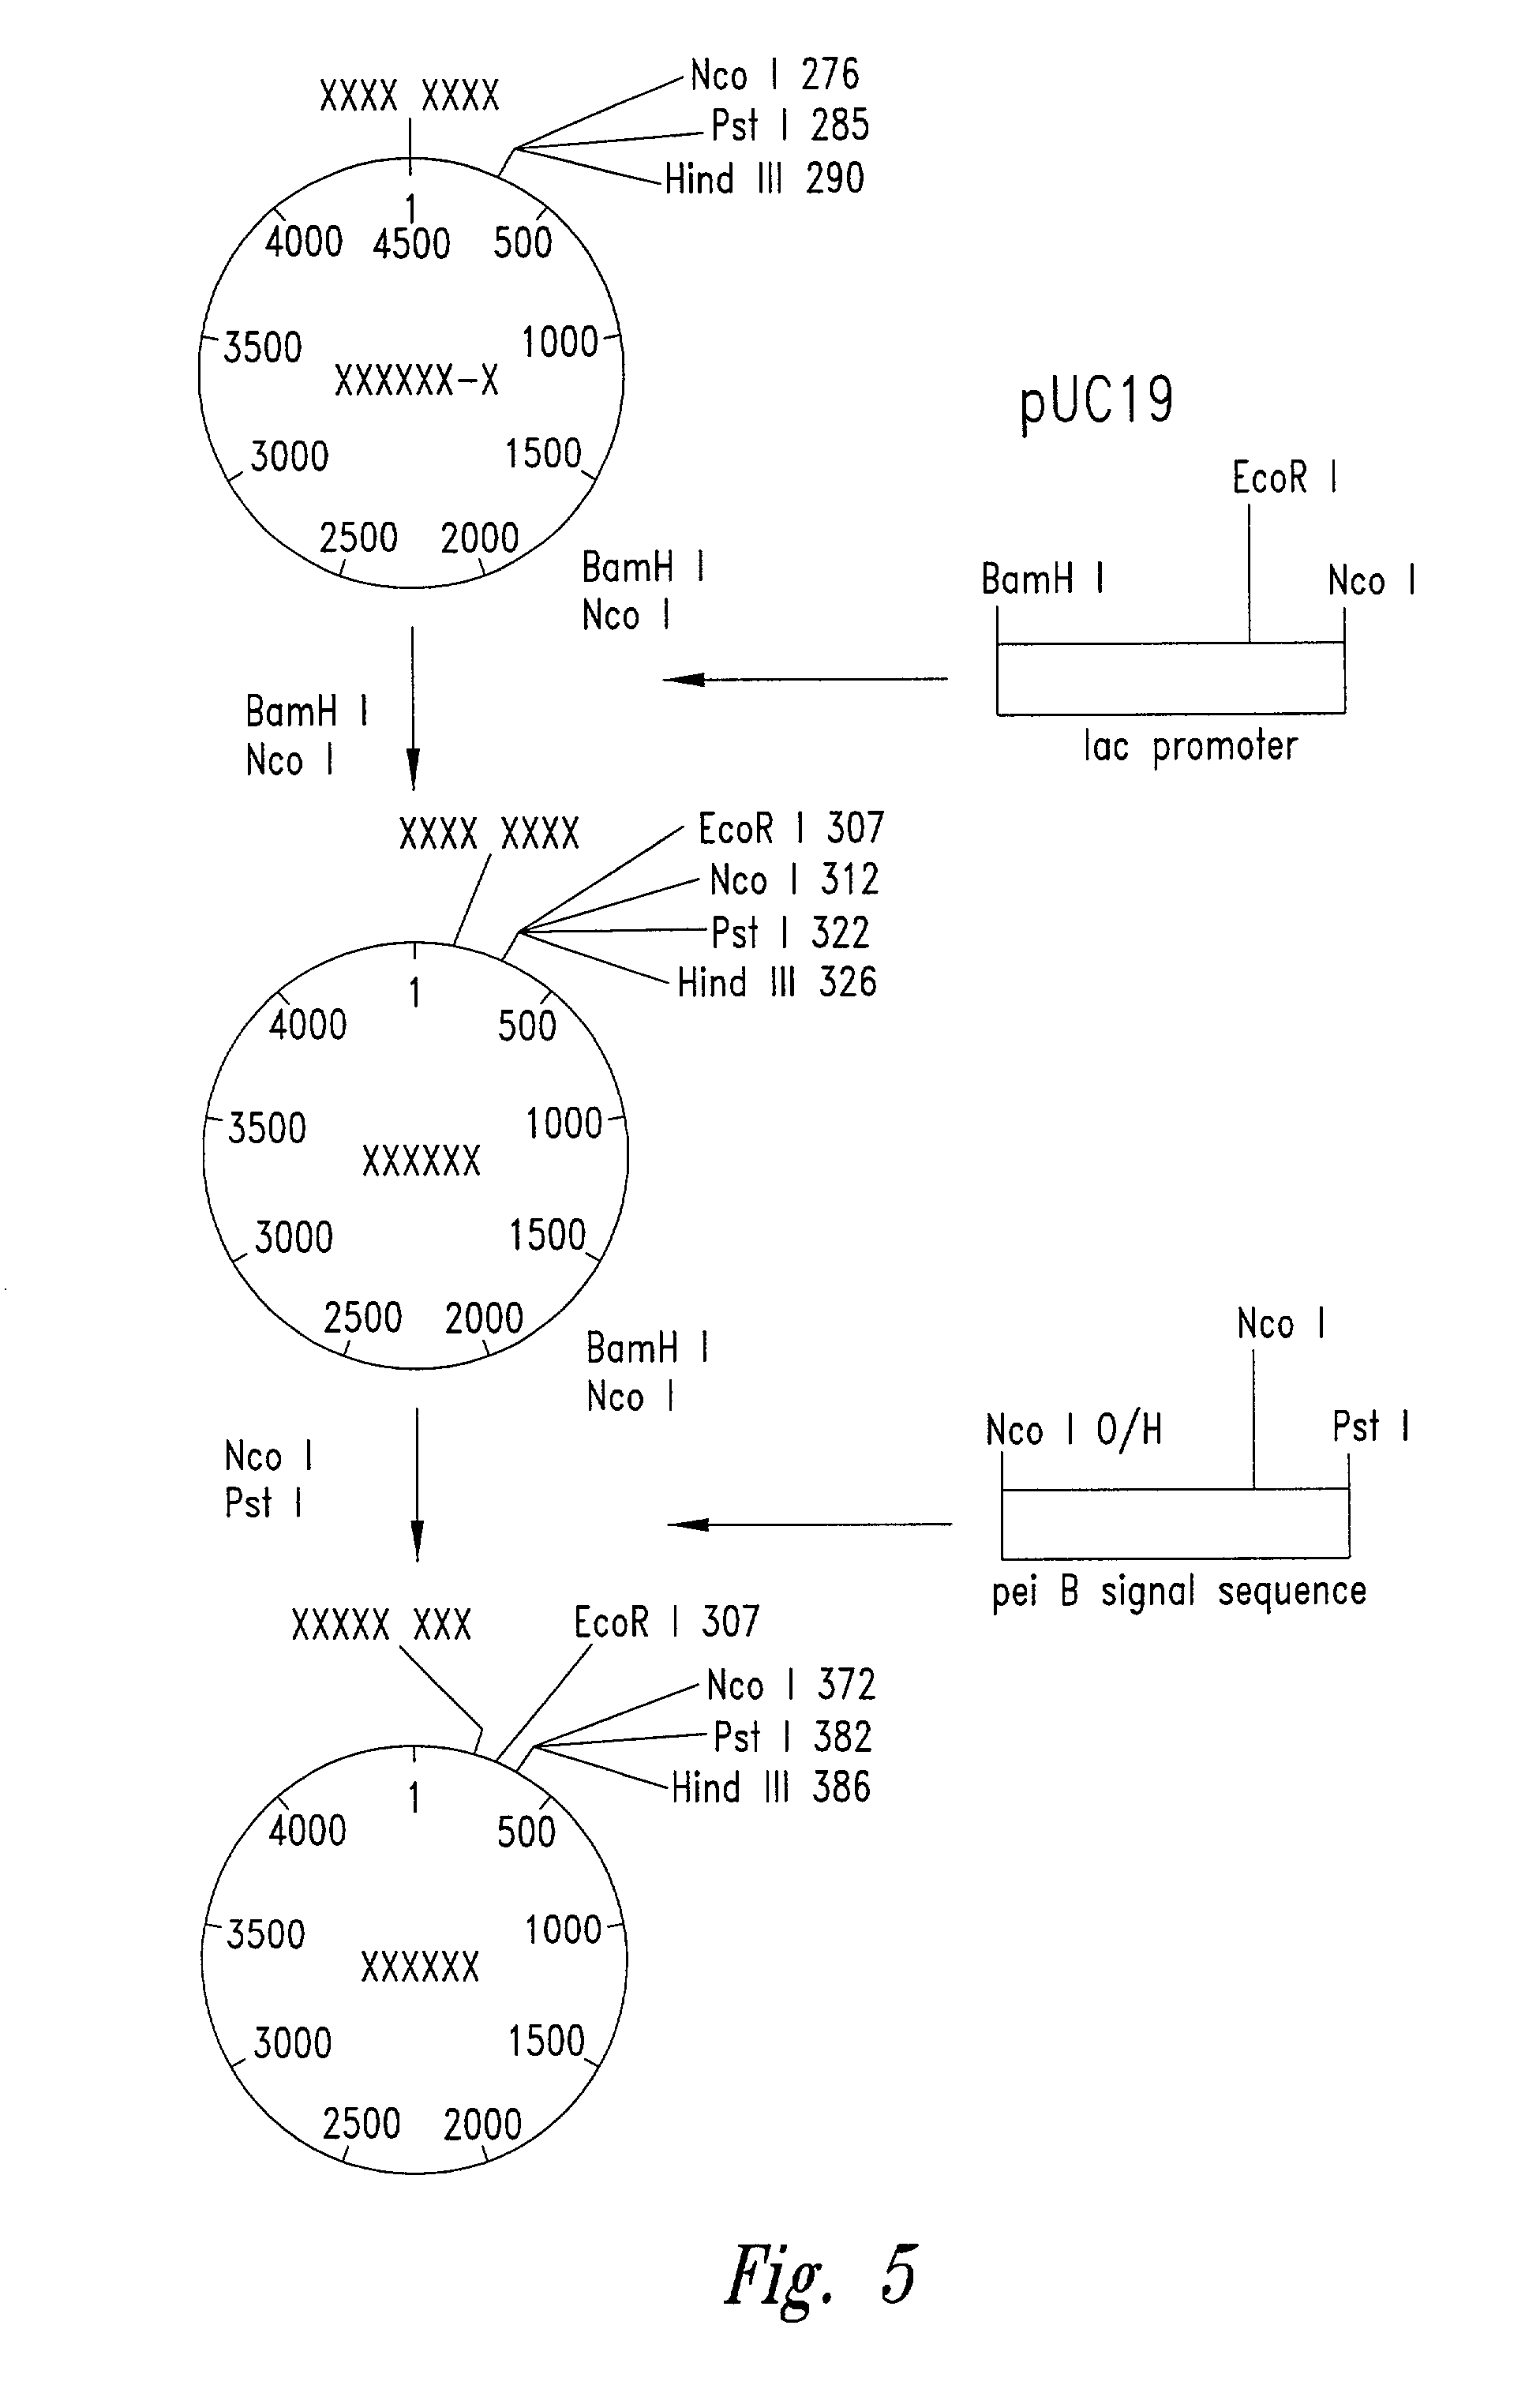 Streptavidin expressed gene fusions and methods of use thereof